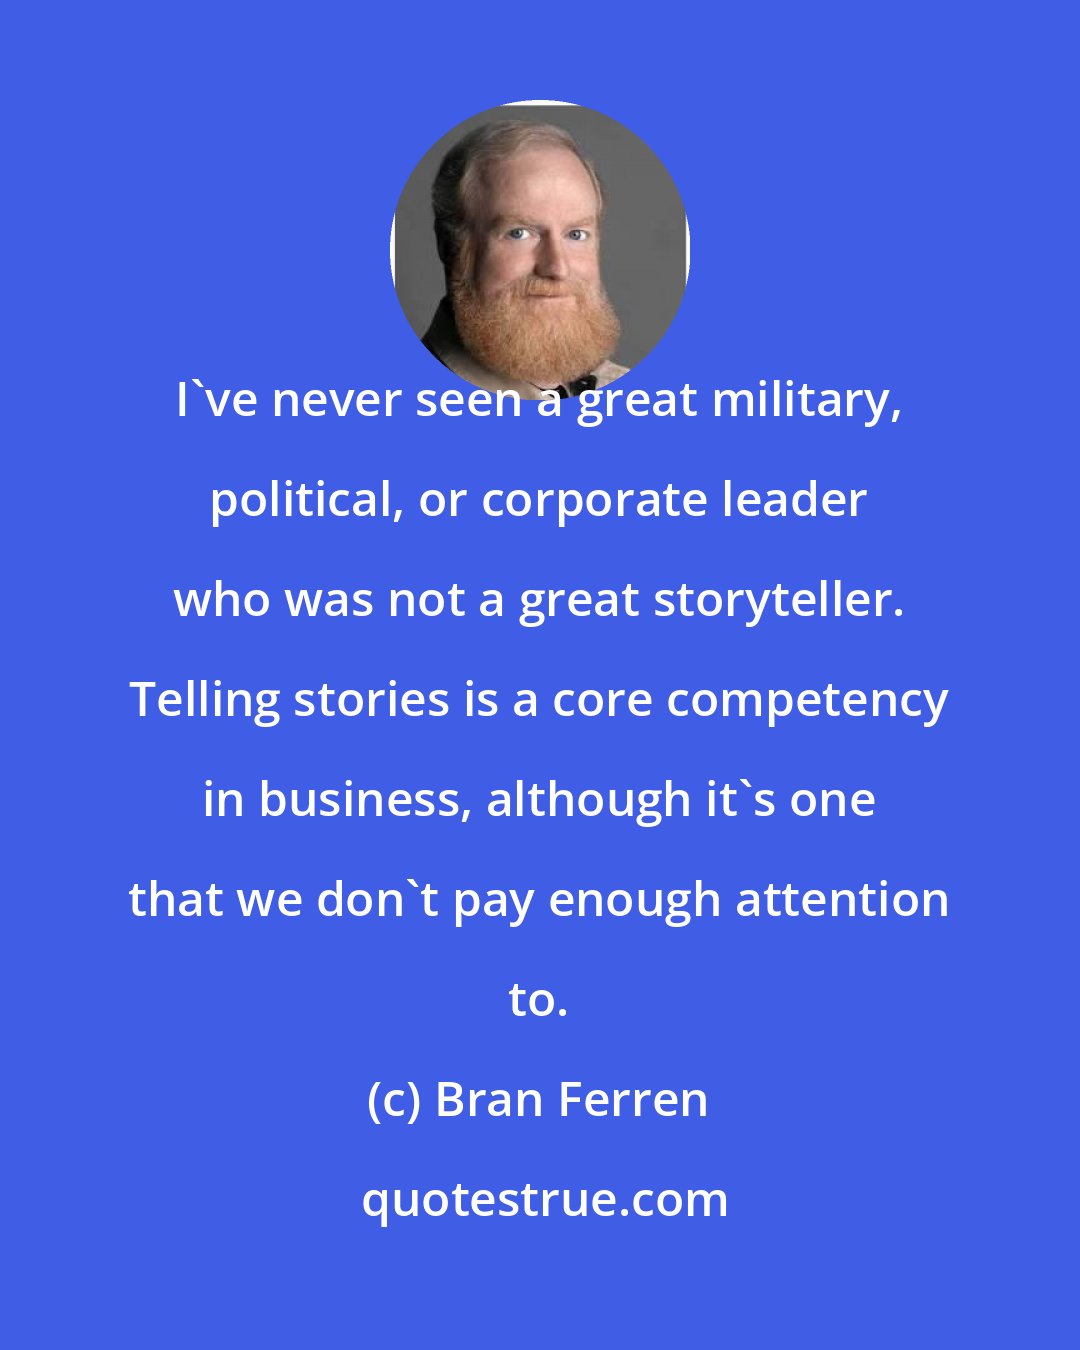 Bran Ferren: I've never seen a great military, political, or corporate leader who was not a great storyteller. Telling stories is a core competency in business, although it's one that we don't pay enough attention to.